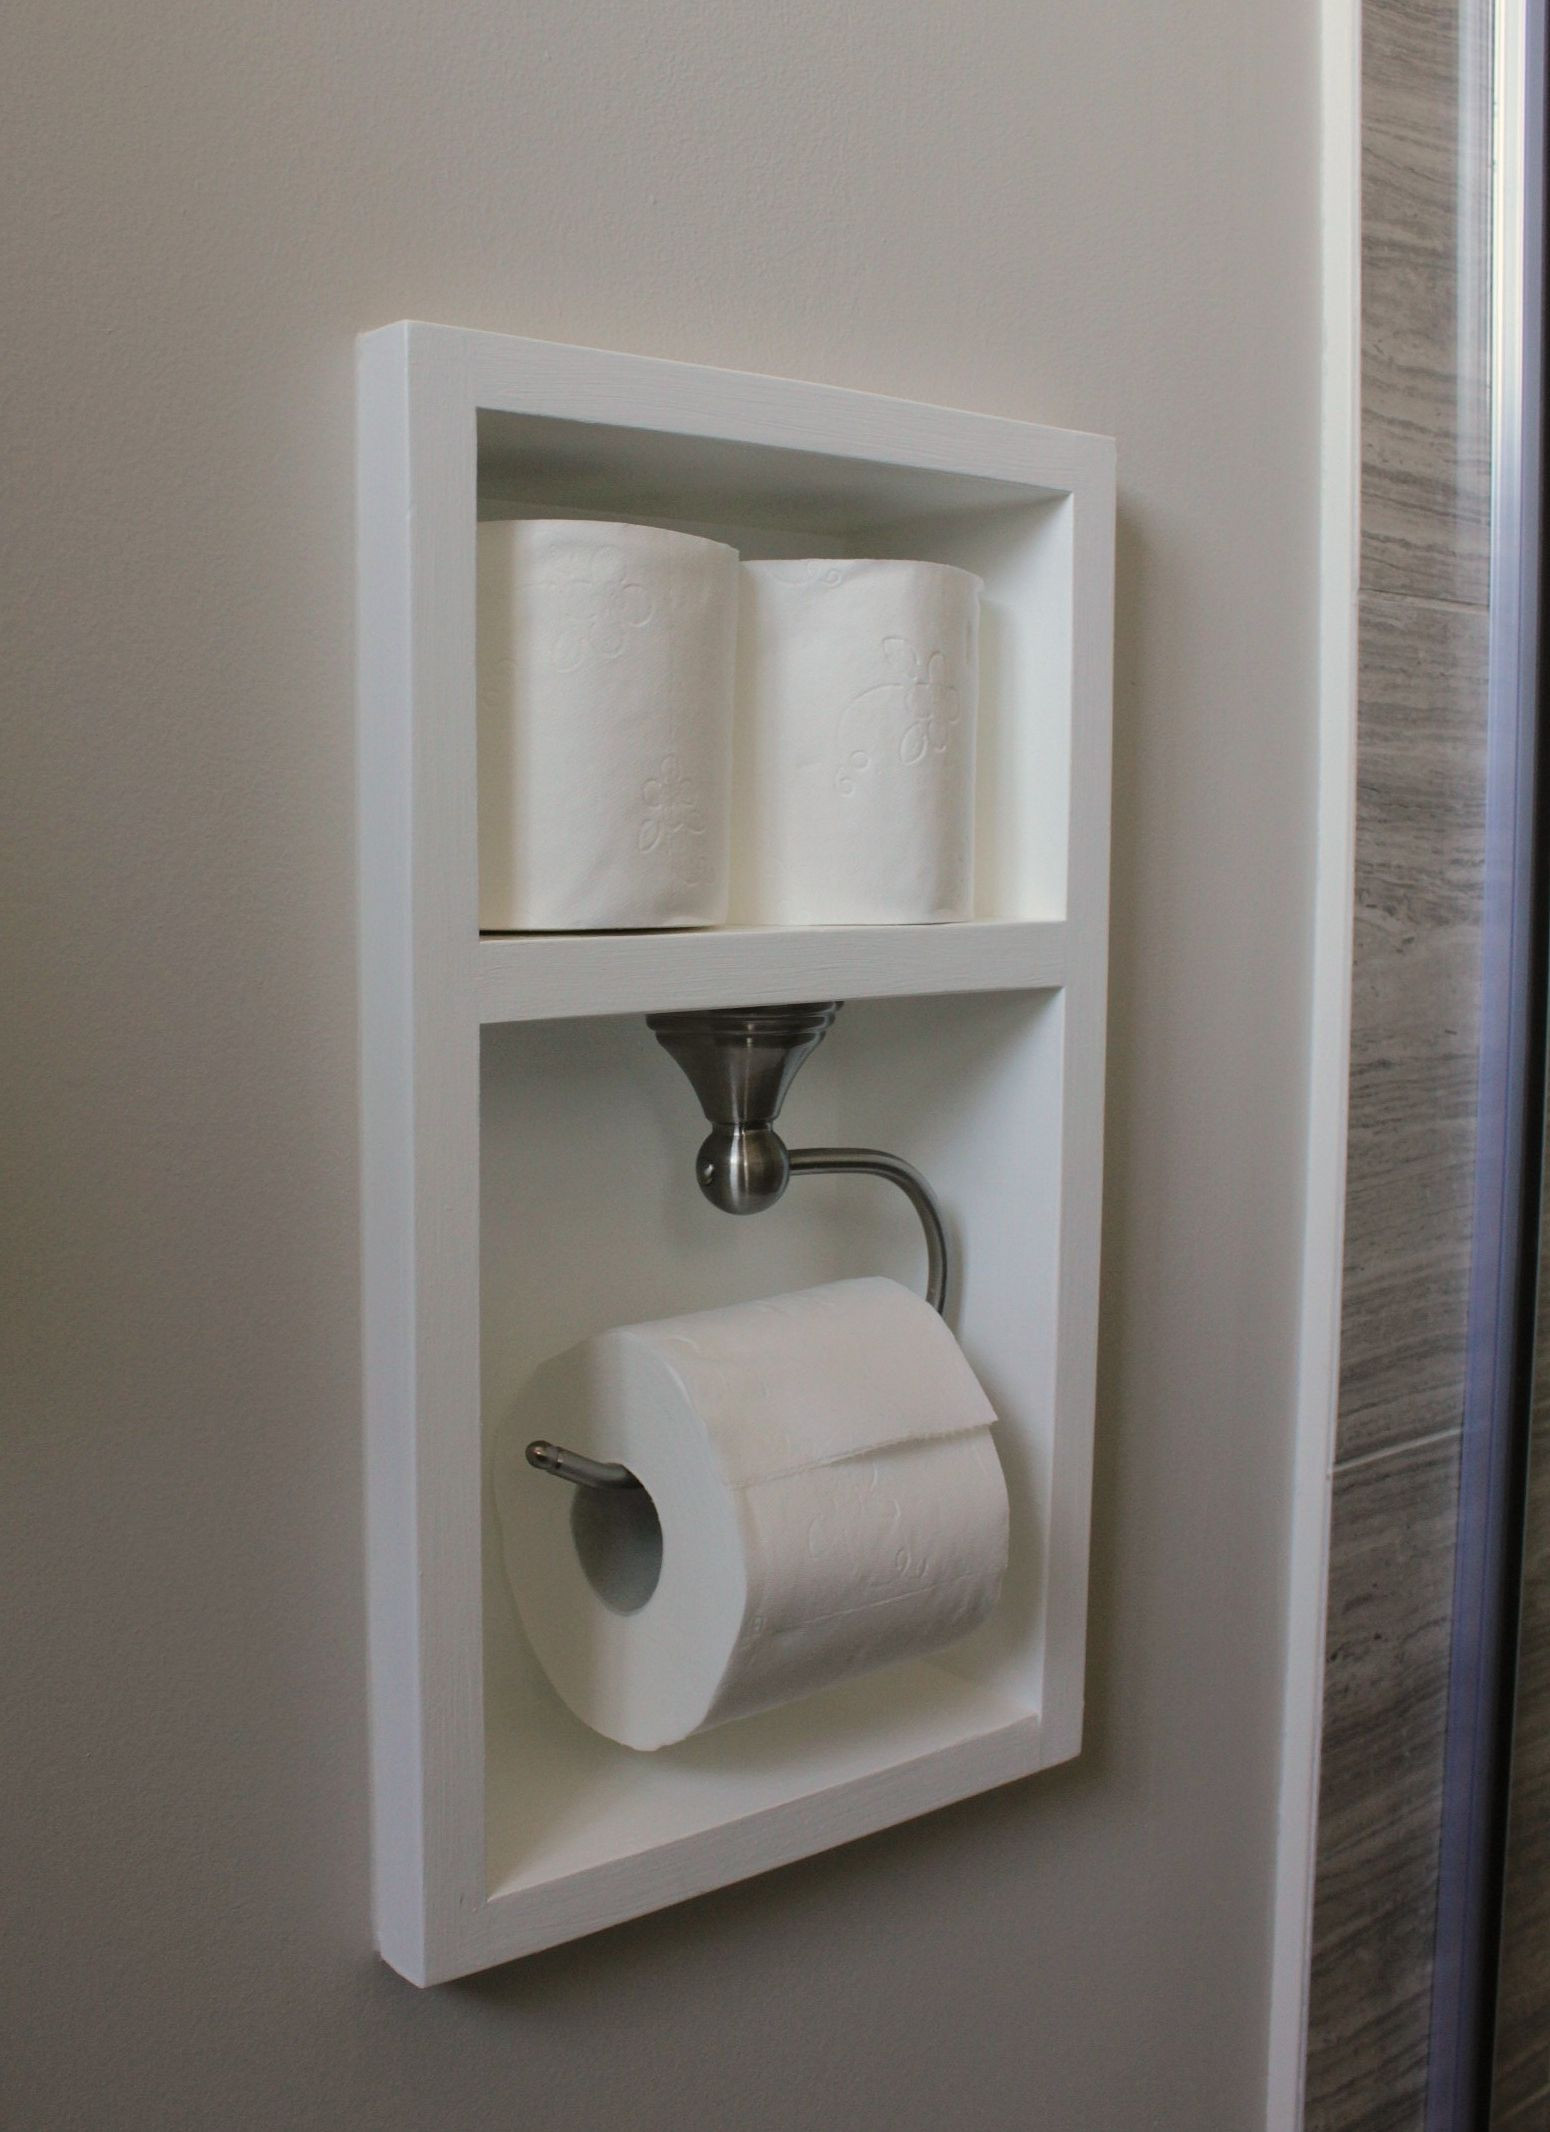 Small Bathroom Toilet Paper Holder
 10 Creative and Easy DIY Toilet Paper Holders